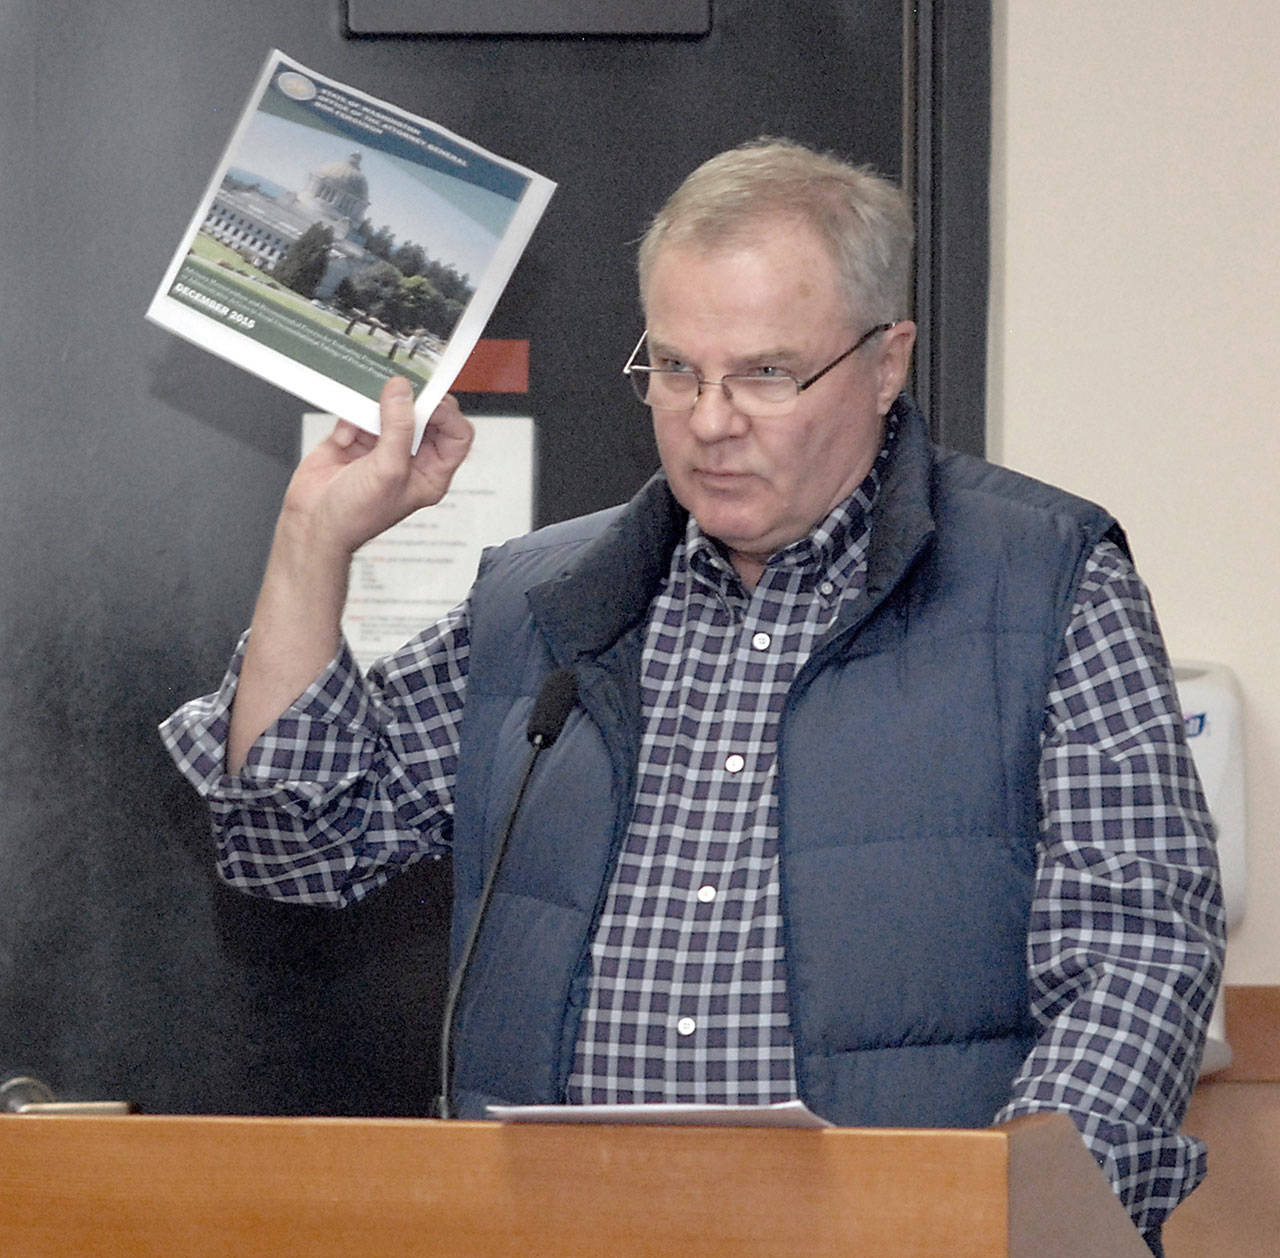 Port Angeles Business Association member Jim McEntire, a former commissioner for Clallam County and the Port of Port Angeles, holds up the front page of a state document on regulatory limits as he testifies during a public hearing Tuesday before the Clallam County Board of Commissioners. (Keith Thorpe/Peninsula Daily News)